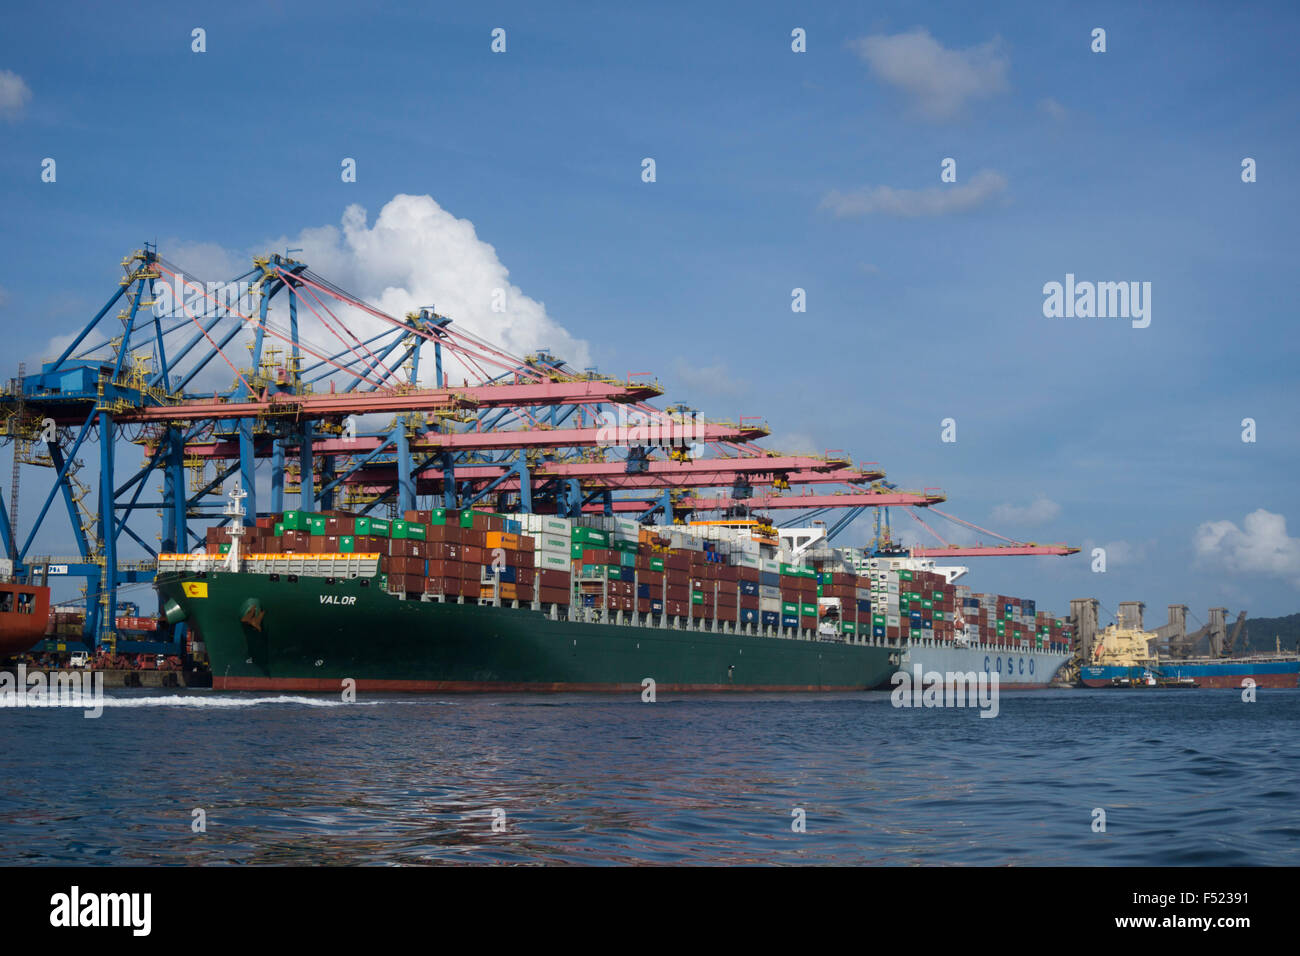 Cargo container vessel been loaded/offloaded at Santos port, São Paulo, Brazil Stock Photo